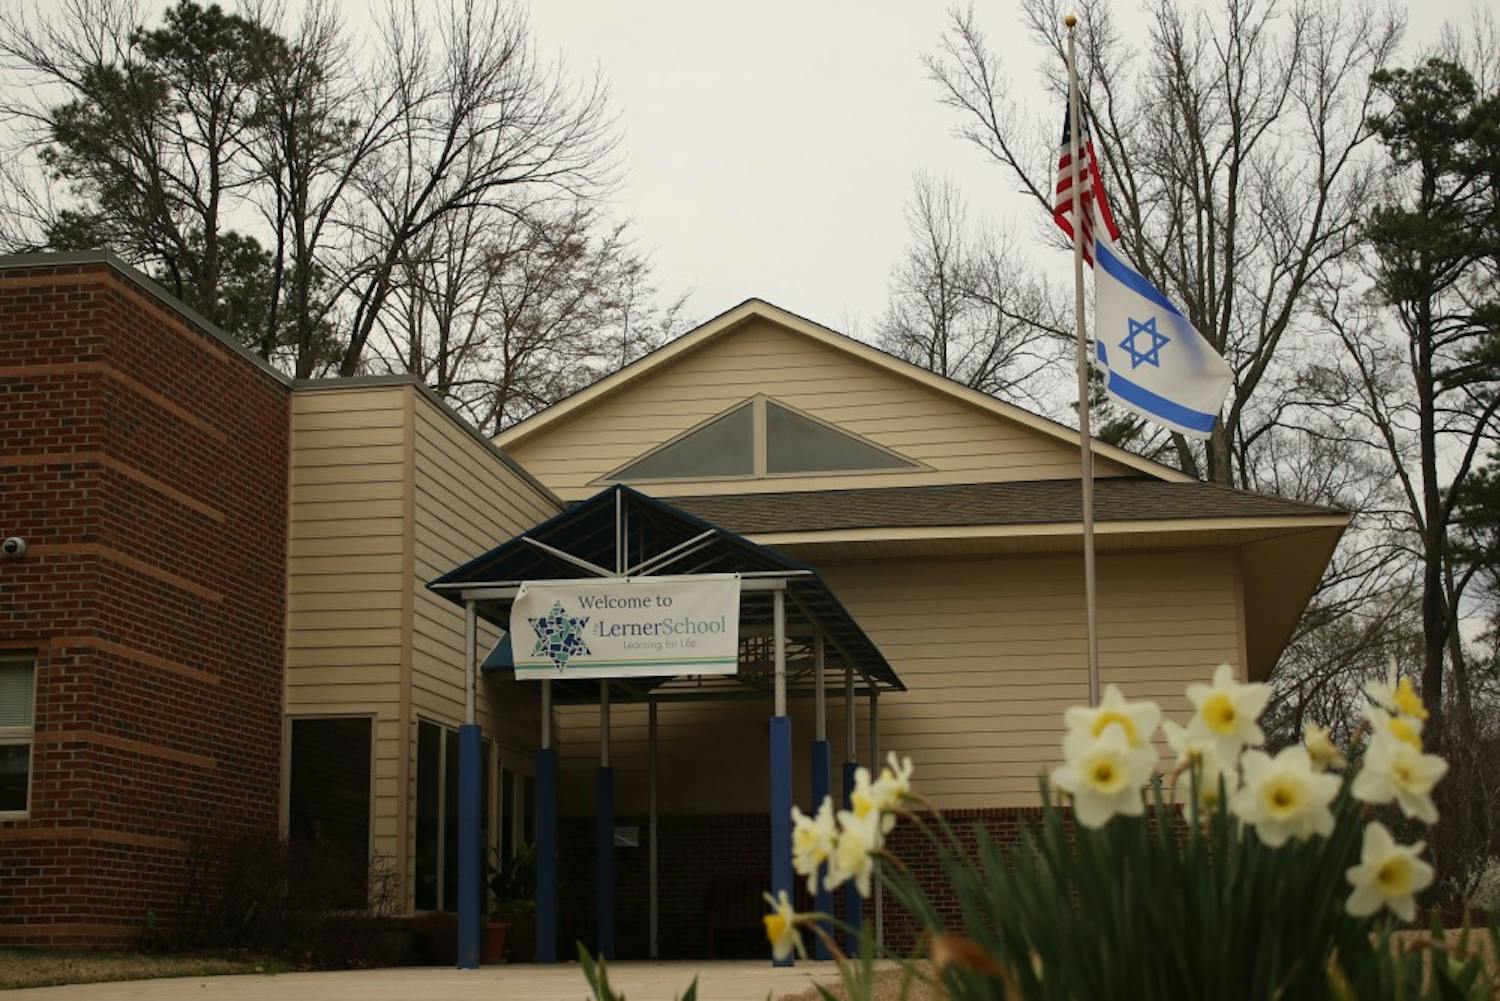 On Wednesday, The Lerner Jewish Community Day School received an anti-semitic&nbsp;bomb threat.&nbsp;